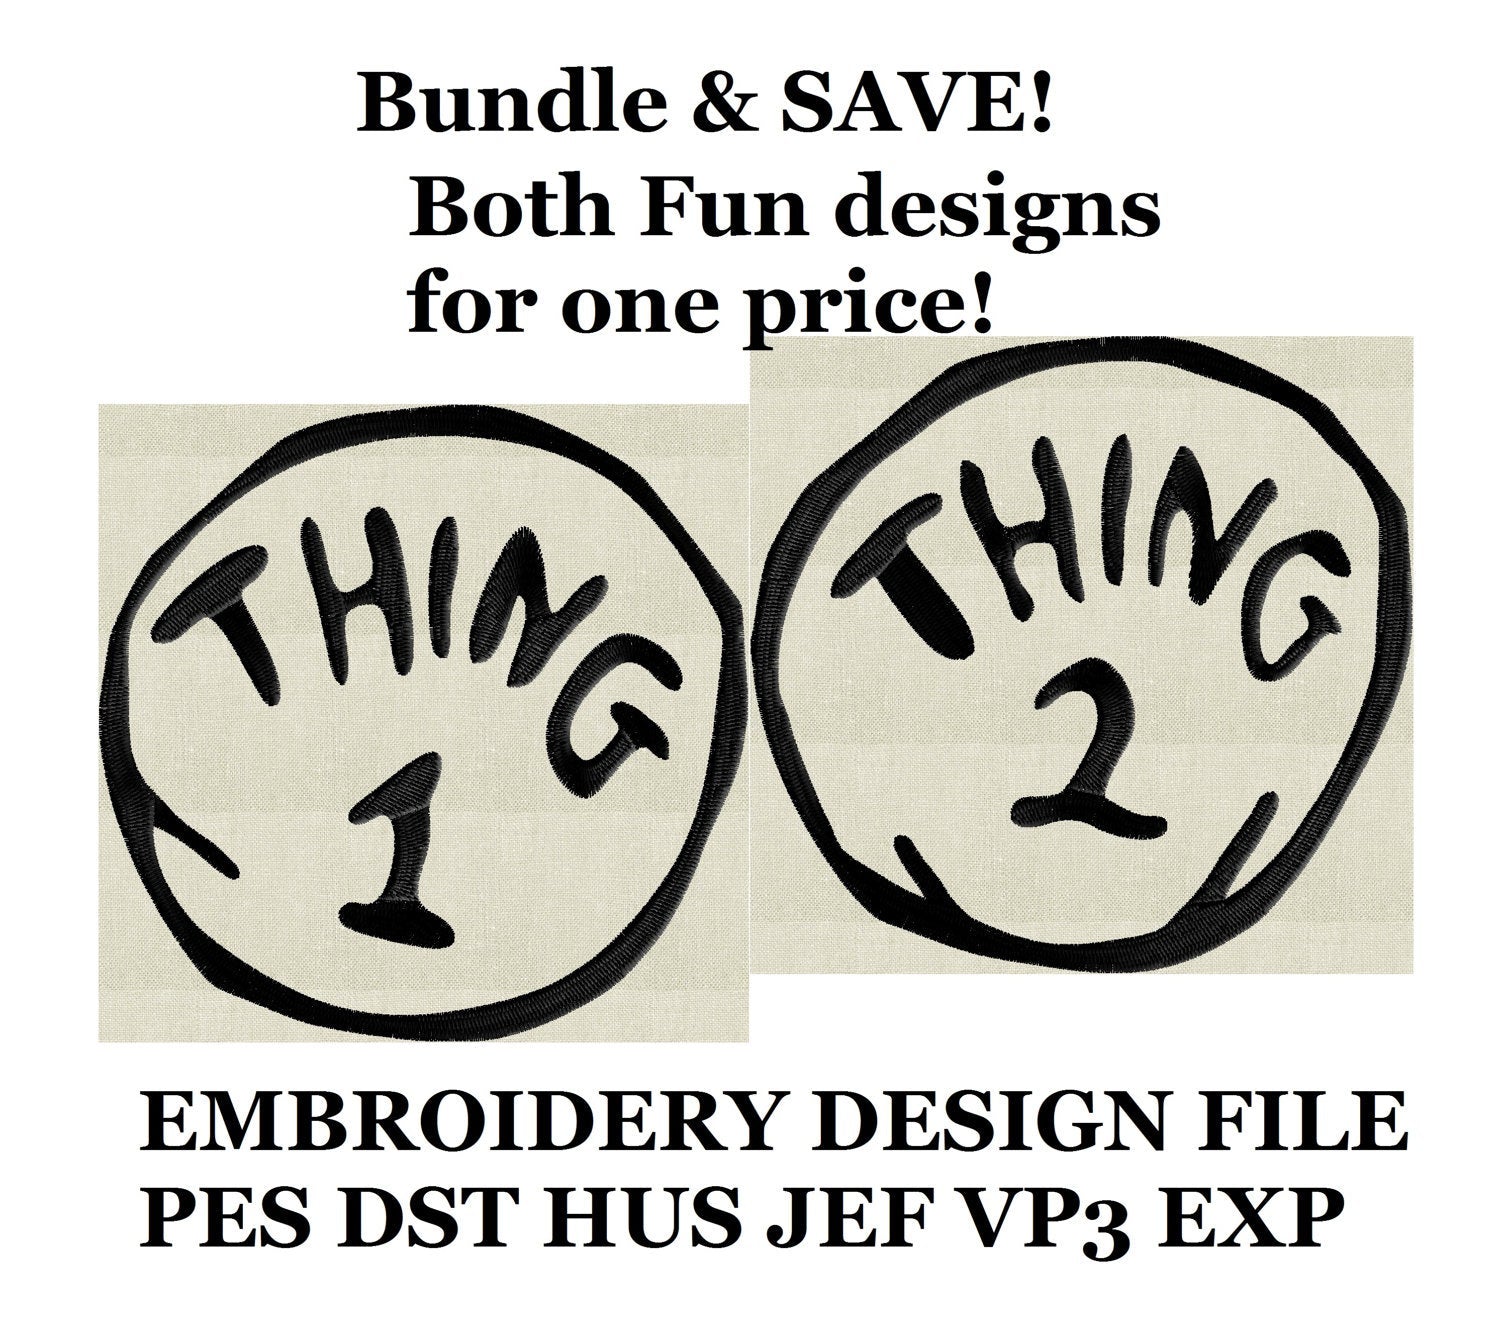 BUNDLE! Thing One & Thing 2 Embroidery DESIGN FILE - Instant download - Exp Vp3 Dst Hus Jef Pes formats - 2 sizes